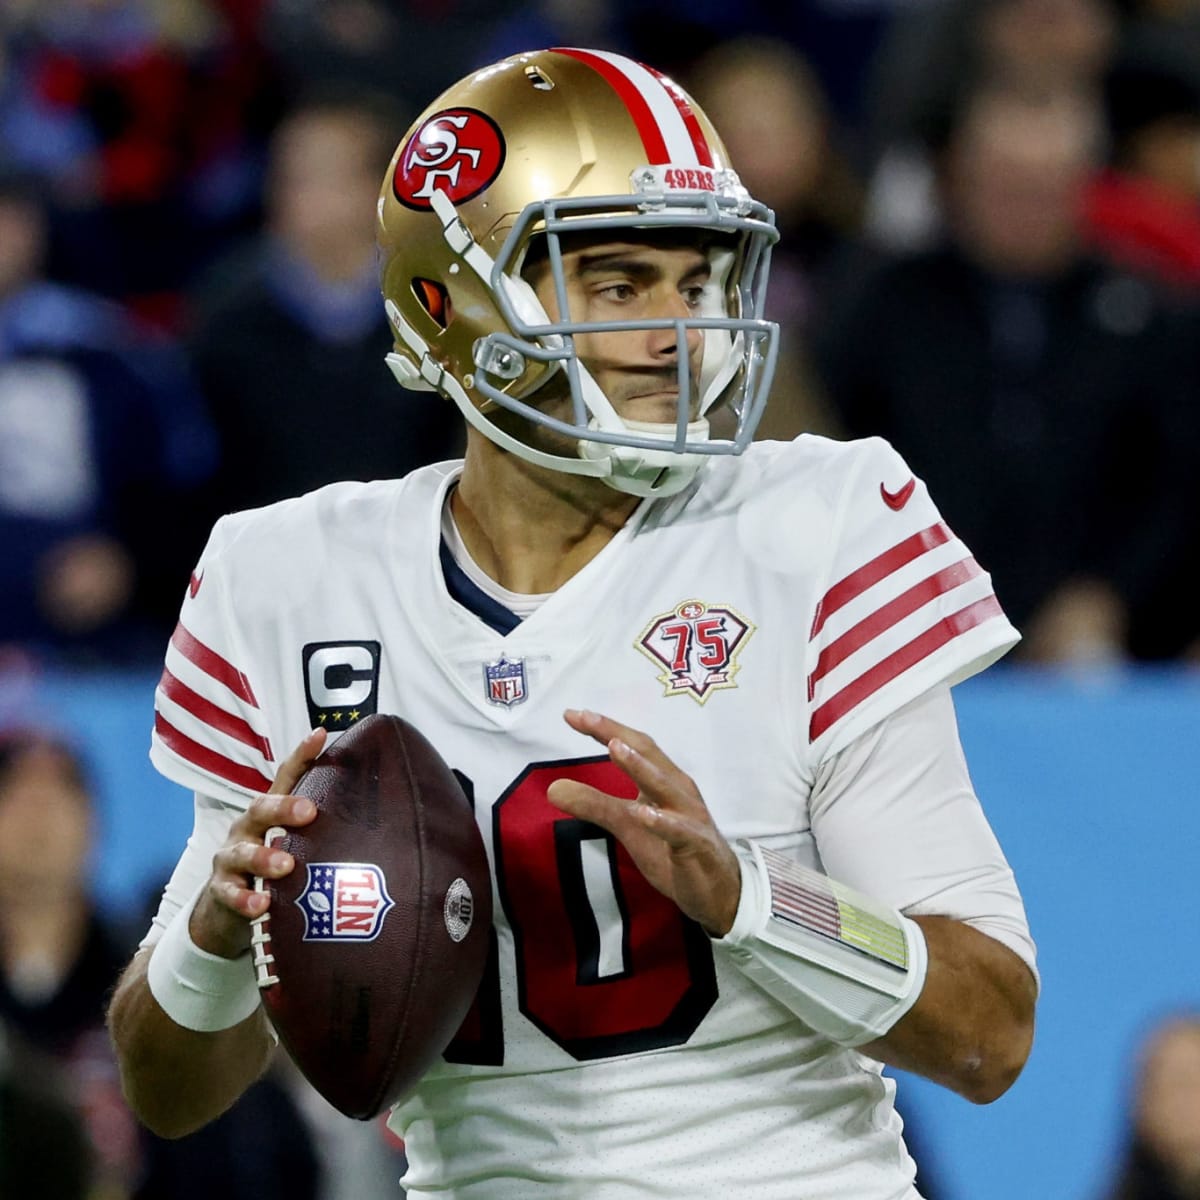 49ers can't overcome Jimmy Garoppolo's mistakes, as Titans steal a win